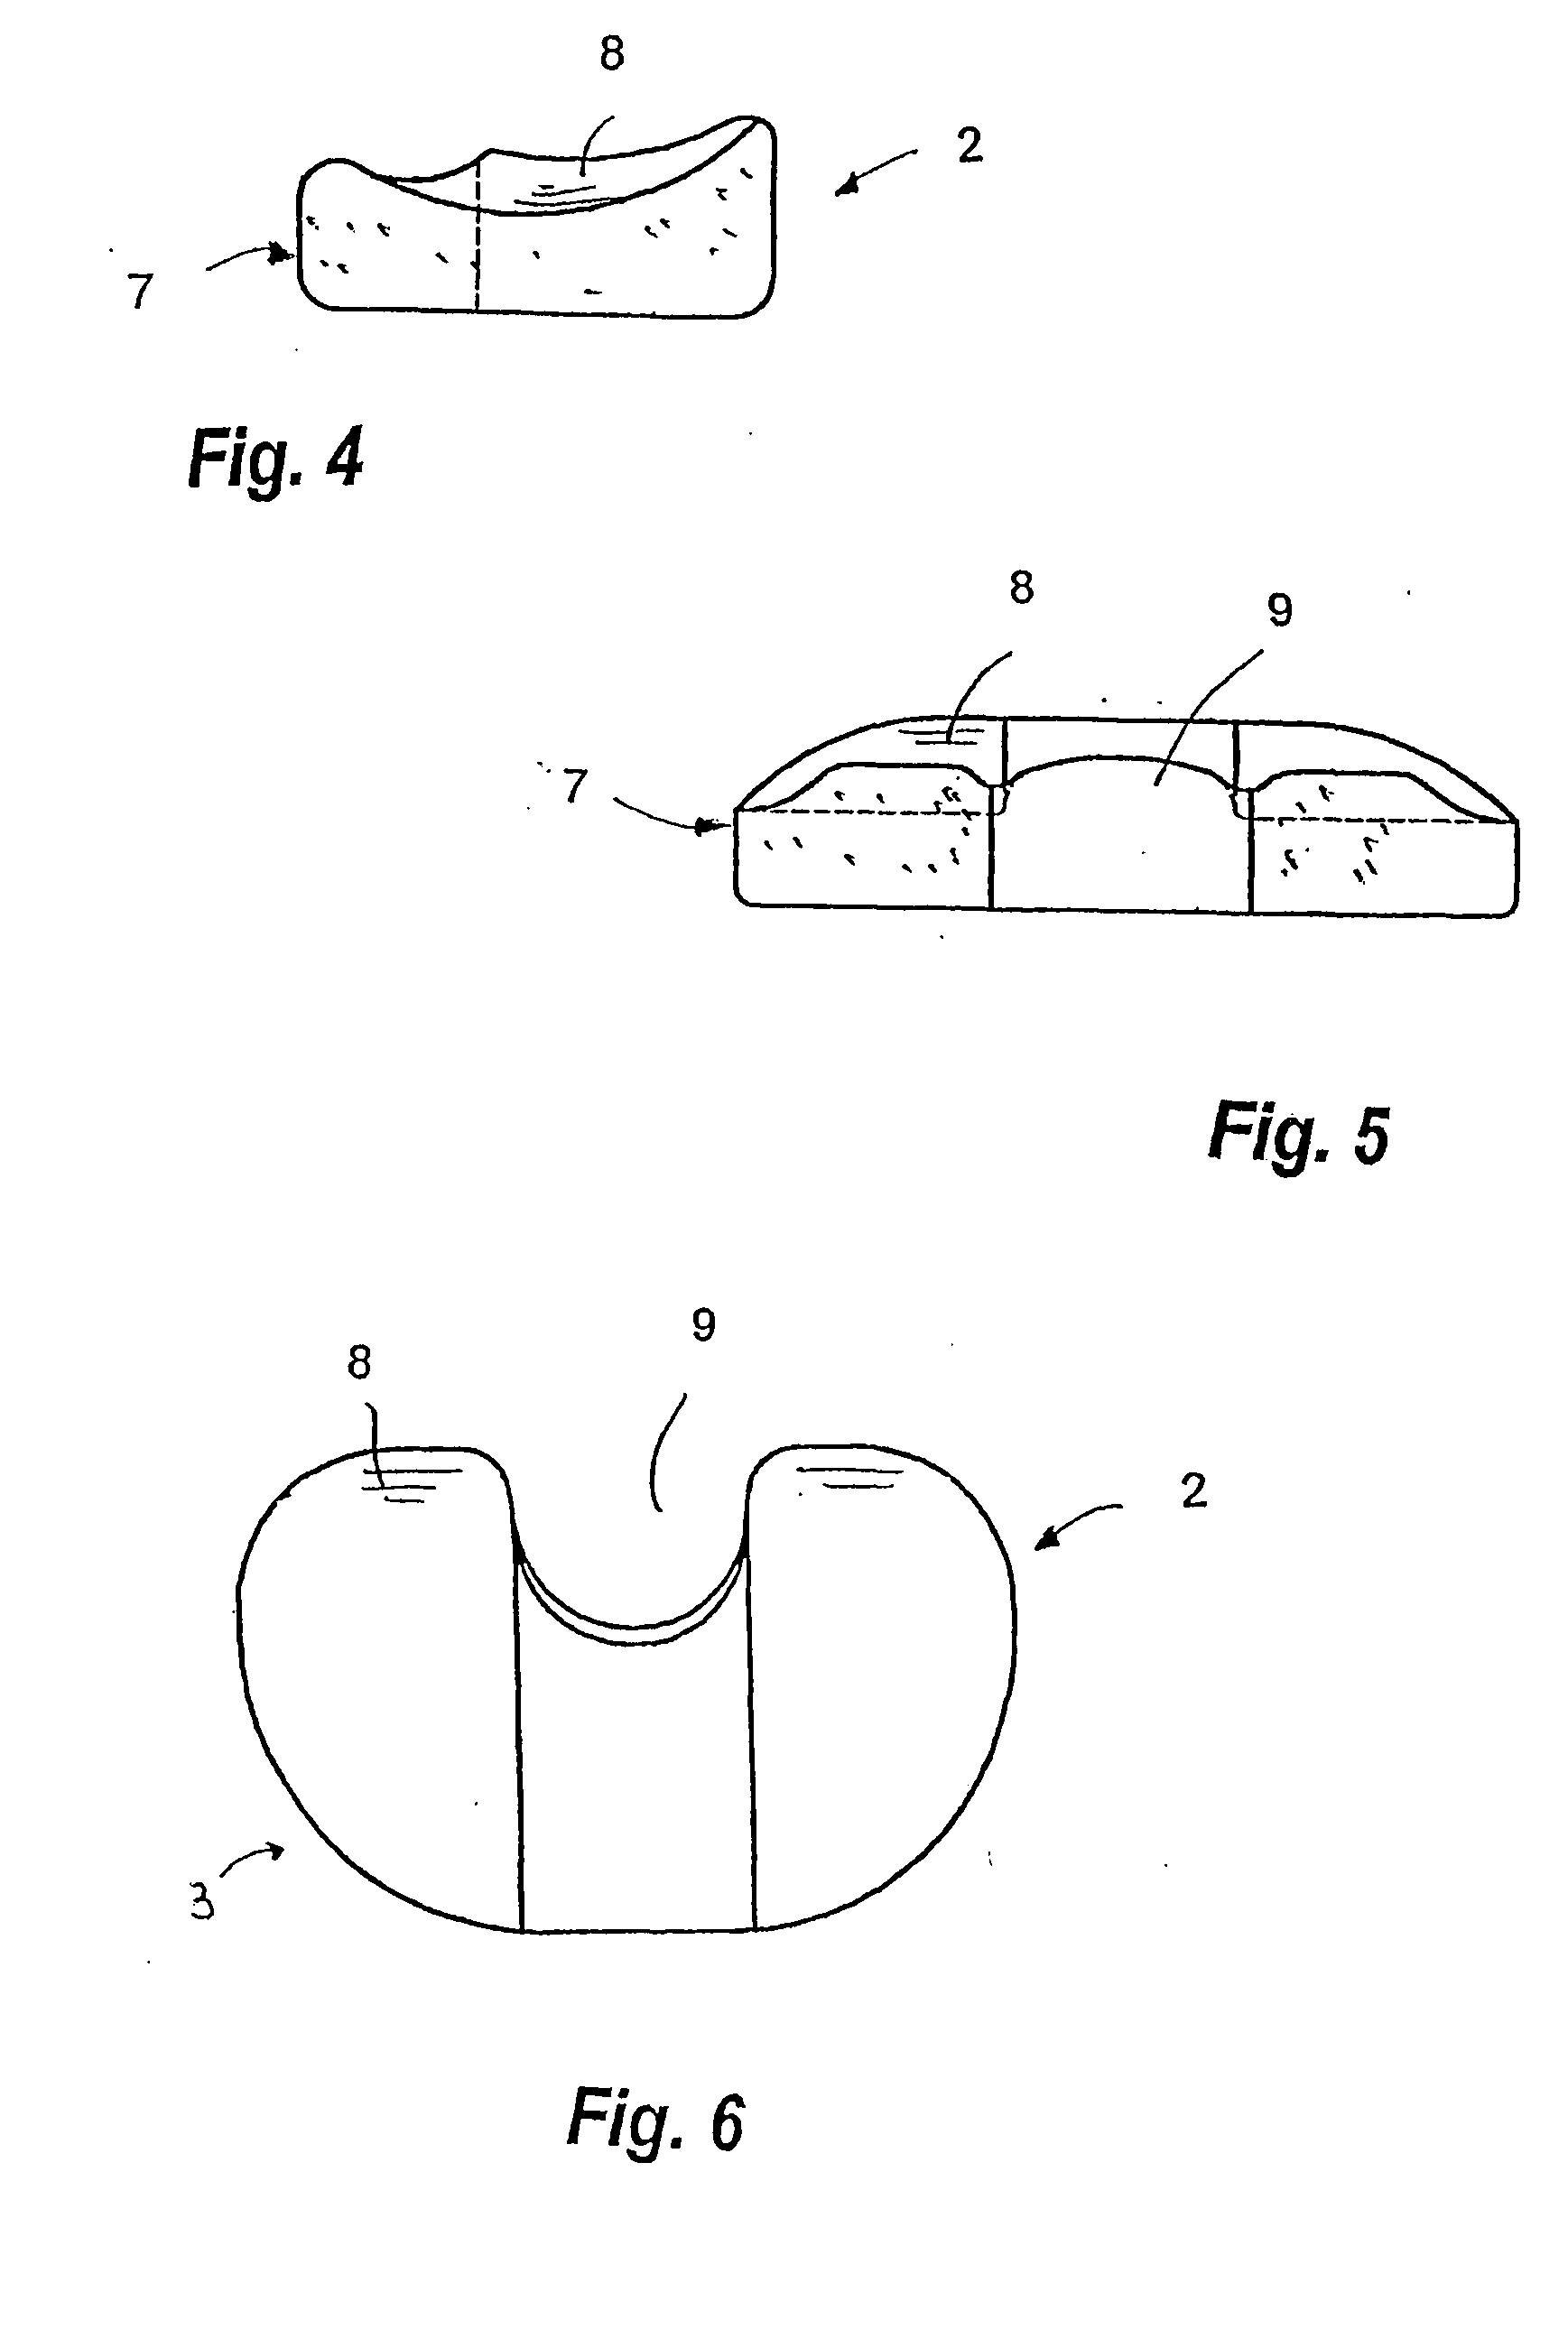 Disposable articulated spacing device for surgical treatment of joints of the human body